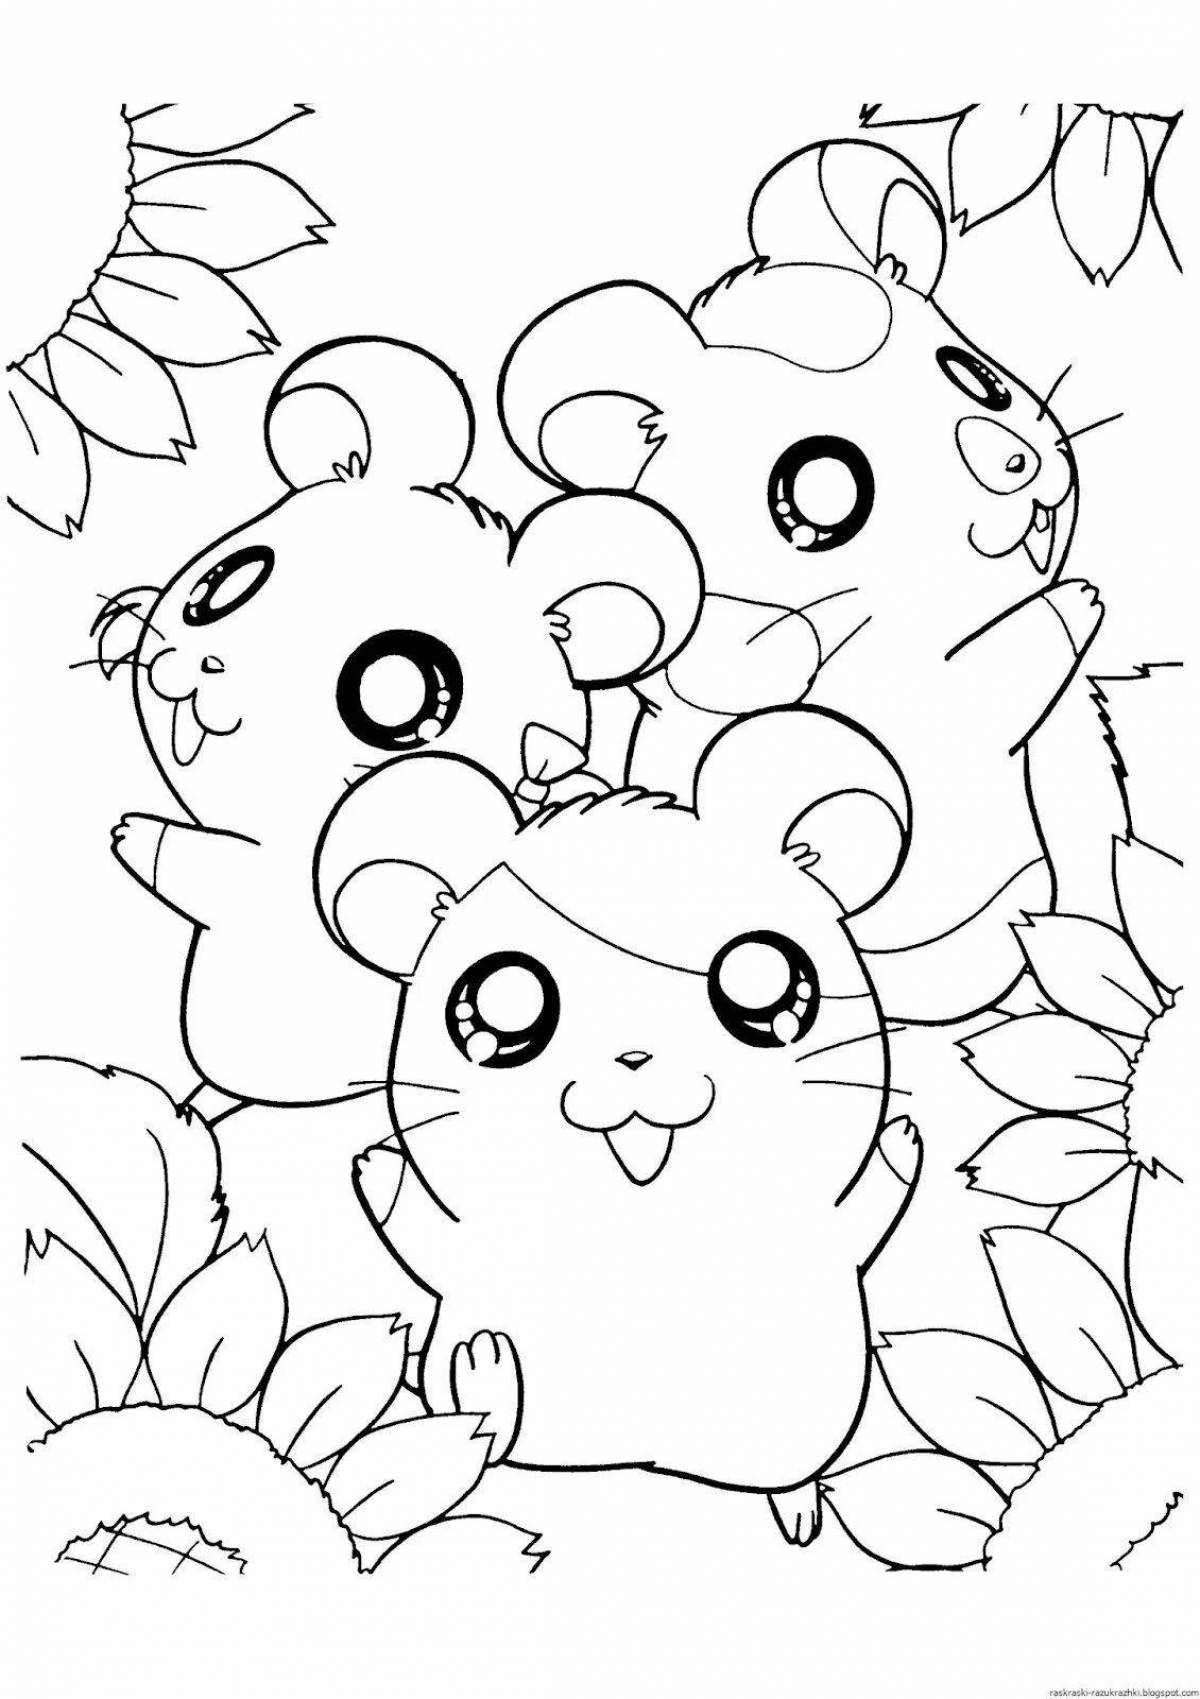 Busy coloring hamster